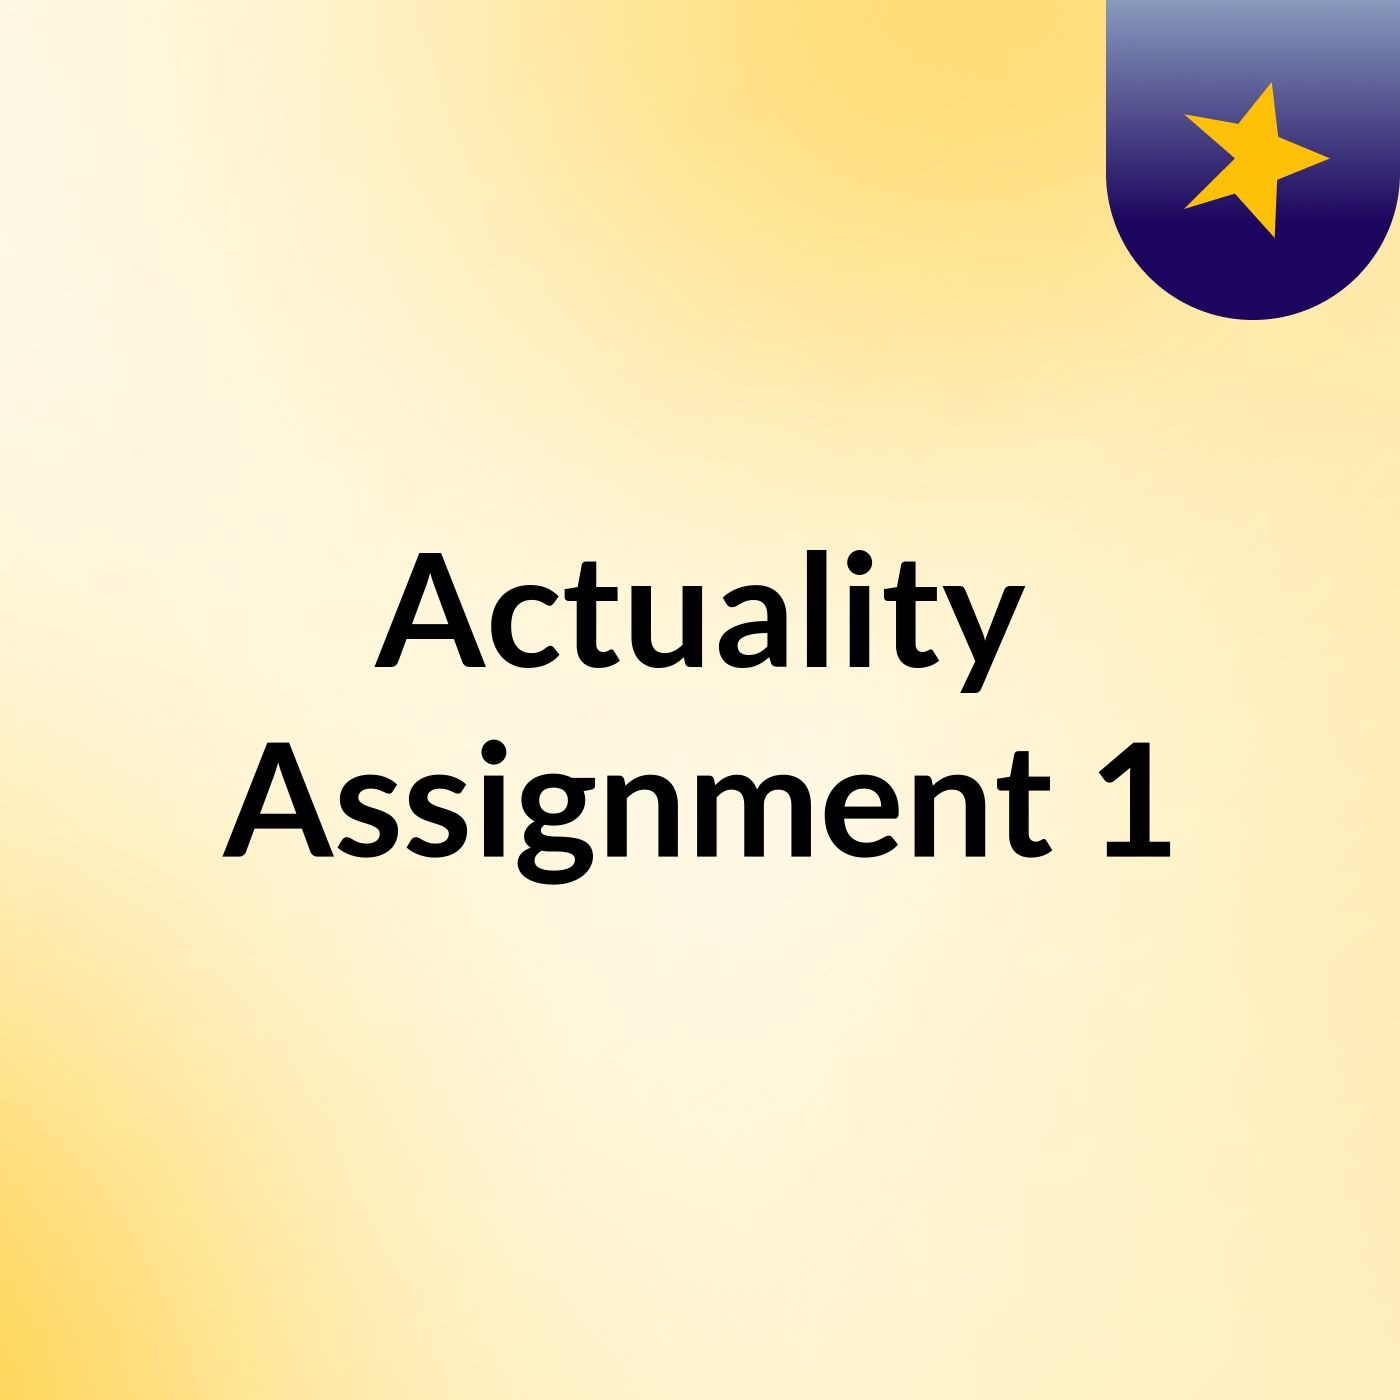 Episode 10 - Actuality Assignment 1